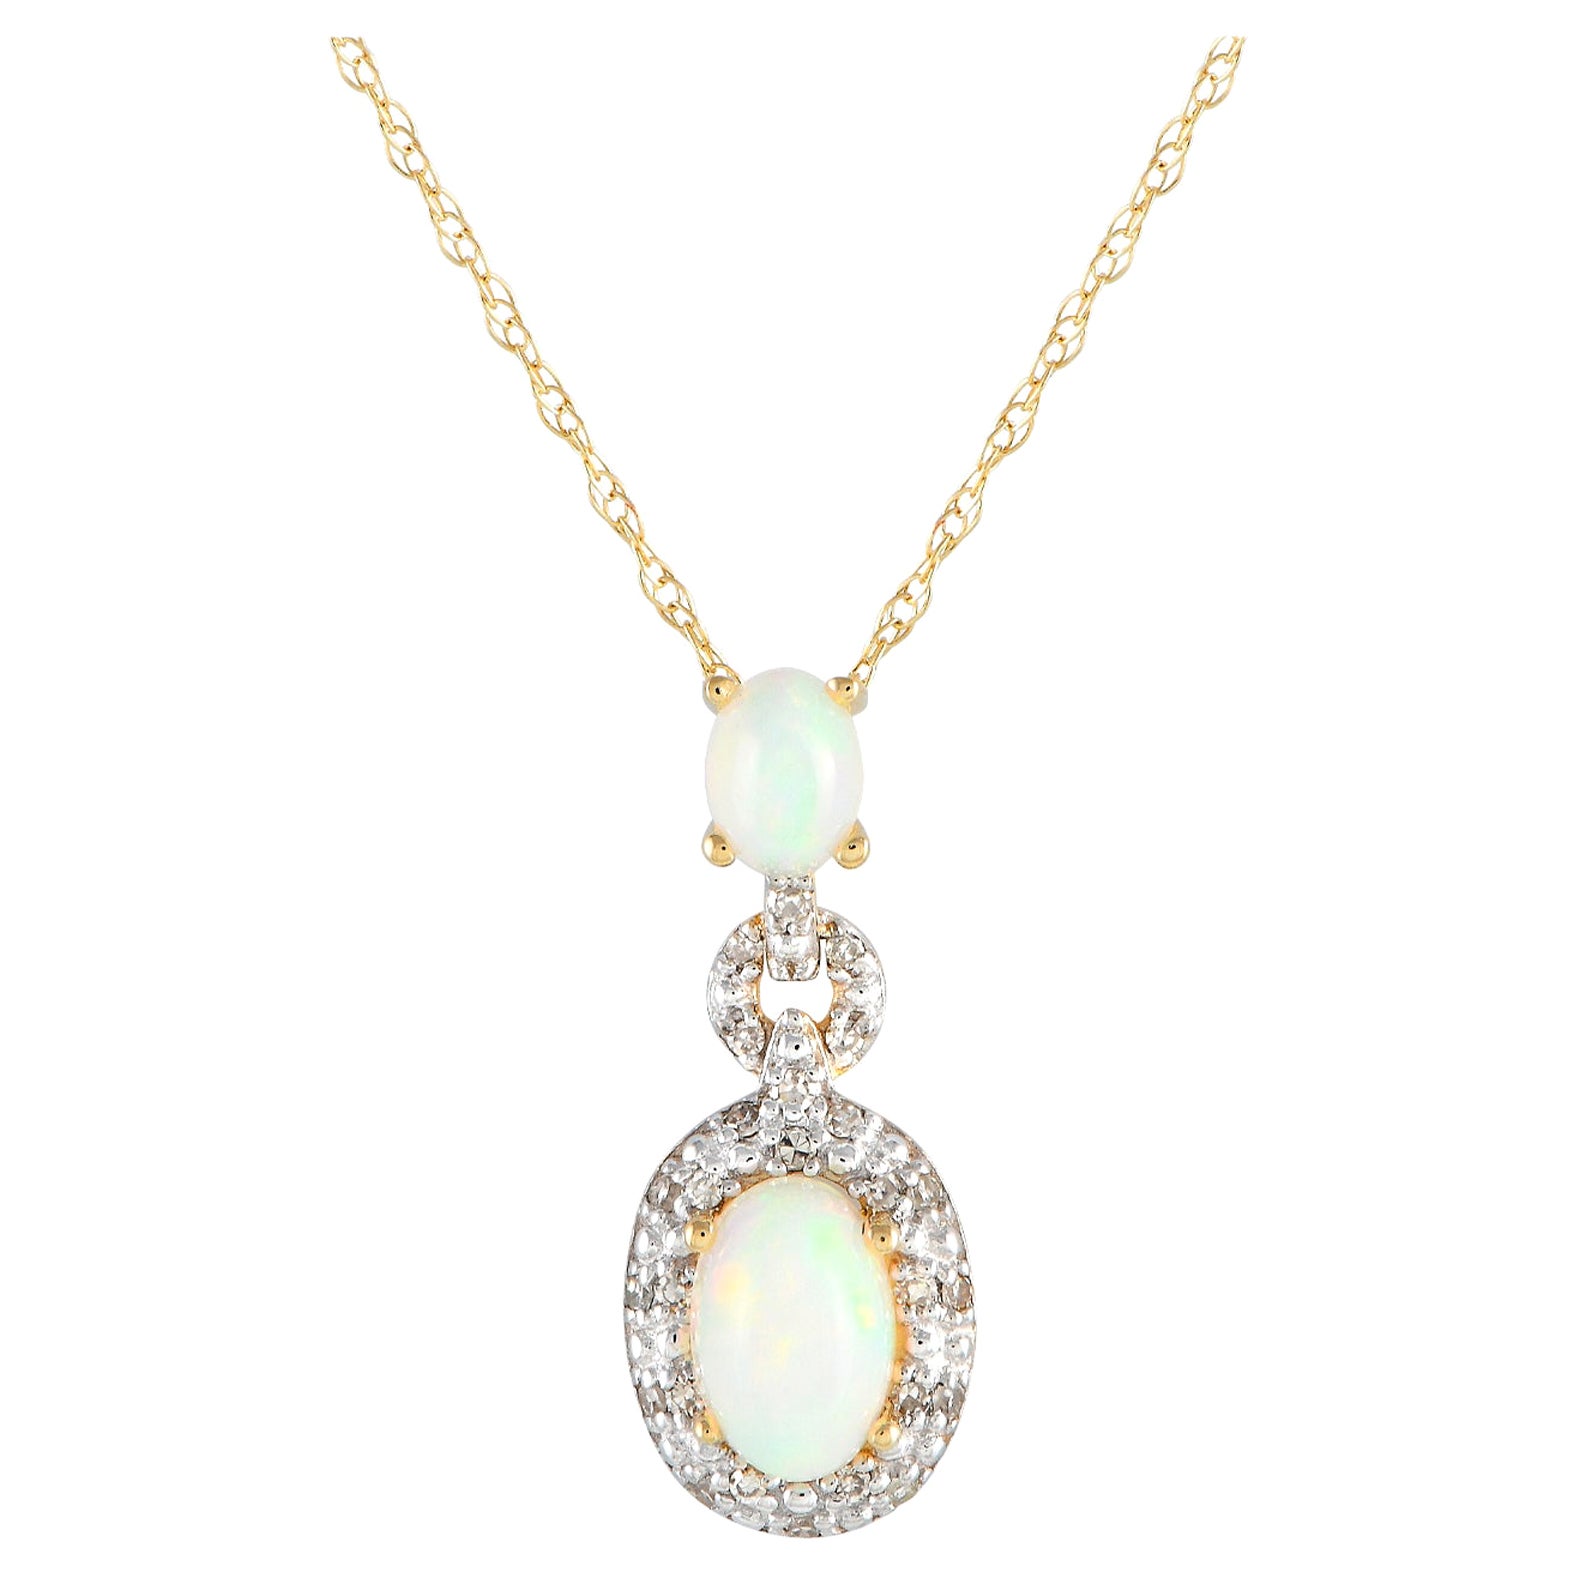 LB Exclusive 14K Yellow Gold 0.08ct Diamond & Opal Pendant Necklace PD4-16183YOP For Sale